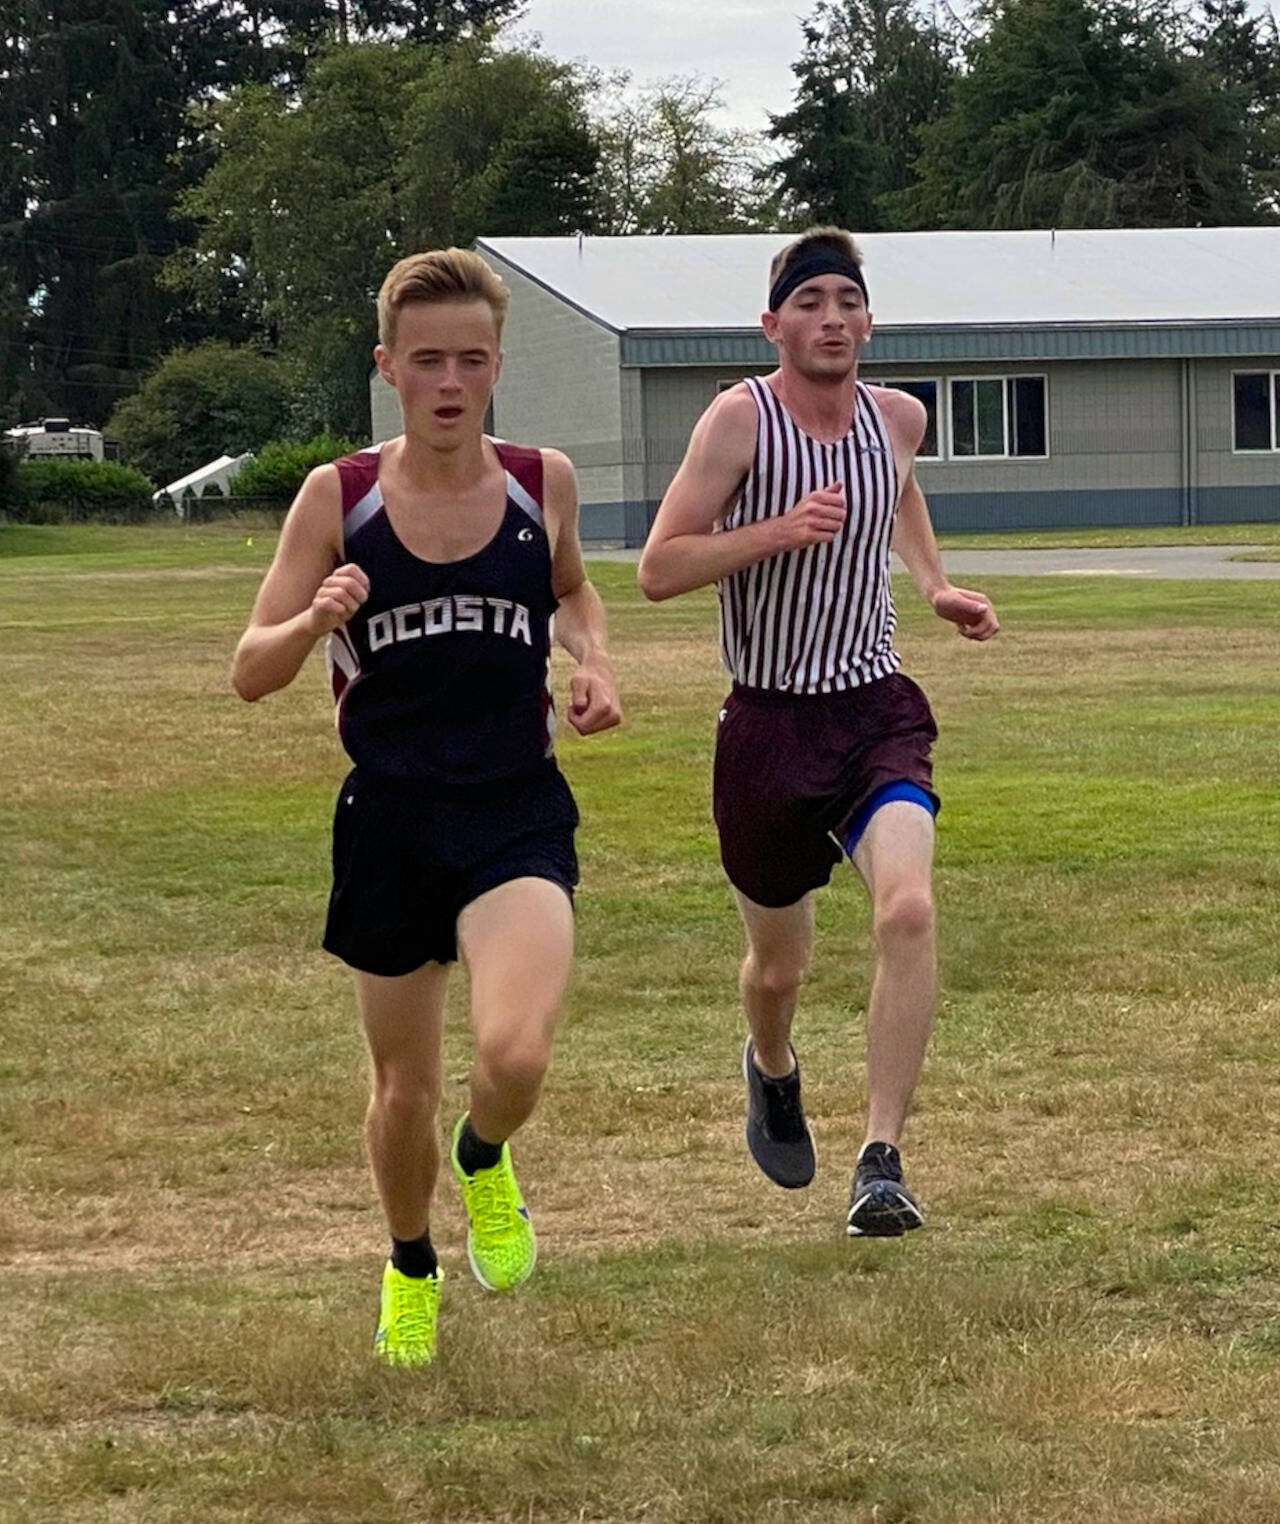 SUBMITTED PHOTO Ocosta’s Dylan Todd, left, and Montesano’s Aric Jacklin crossed the finish line 1-2, respectively, at the Ocosta Invitational cross country meet on Saturday in Westport.